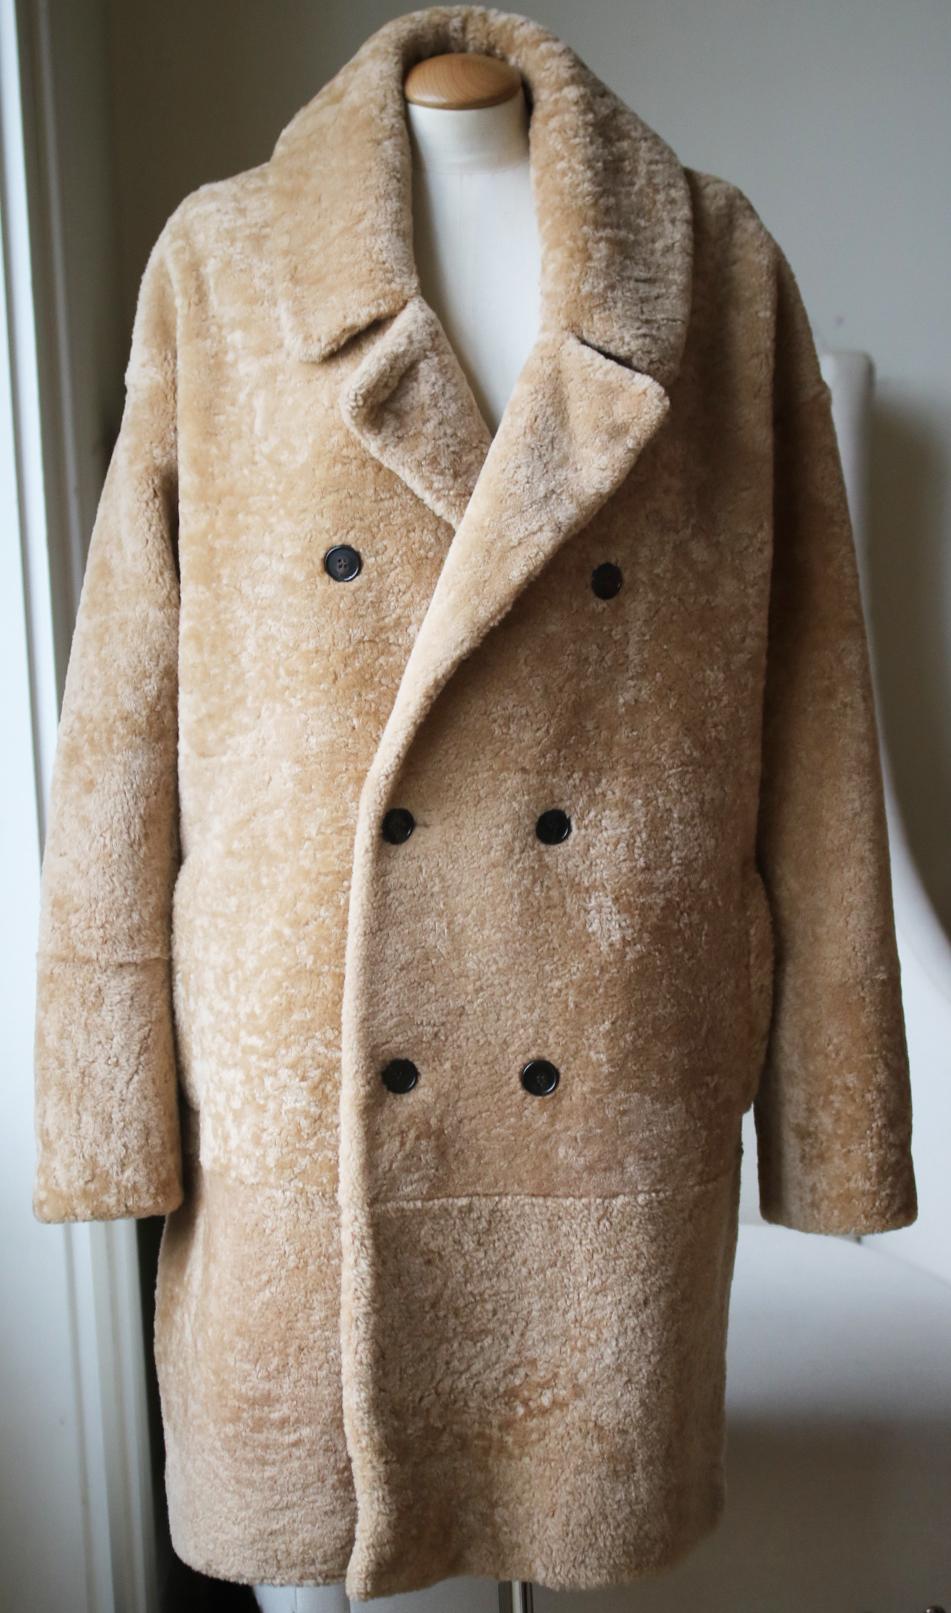 Saint laurent's coat is cut from plush shearling for the cosiest feel and designed with a smart double-breasted front. Lined in satin for a faultless drape. It's shaped with notch lapels. Two slip pockets. Logo-etched horn buttons. Honey-tone